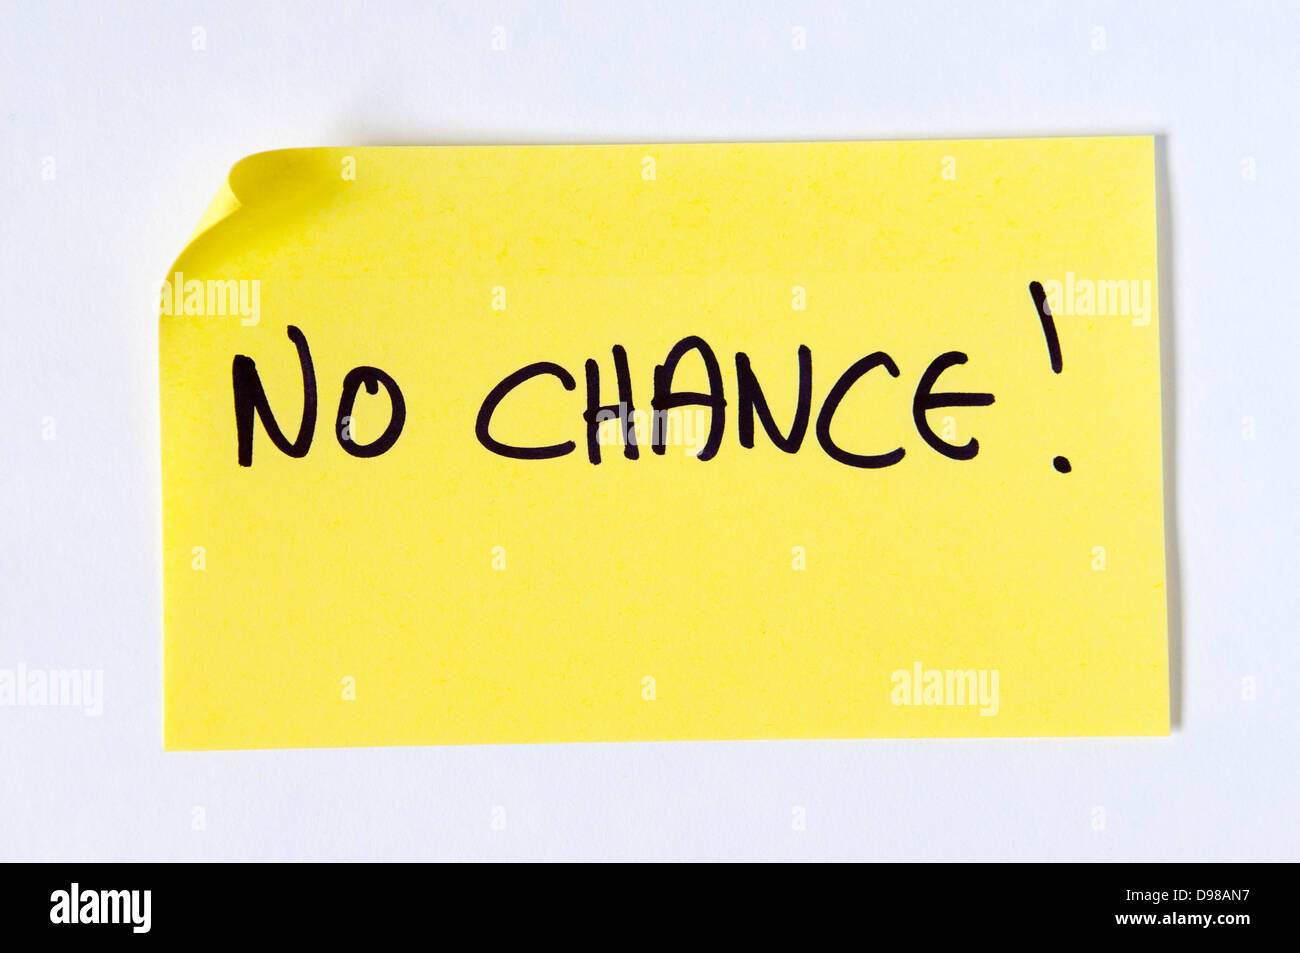 No Chance! Written in capital letters on a yellow post it note Stock Photo